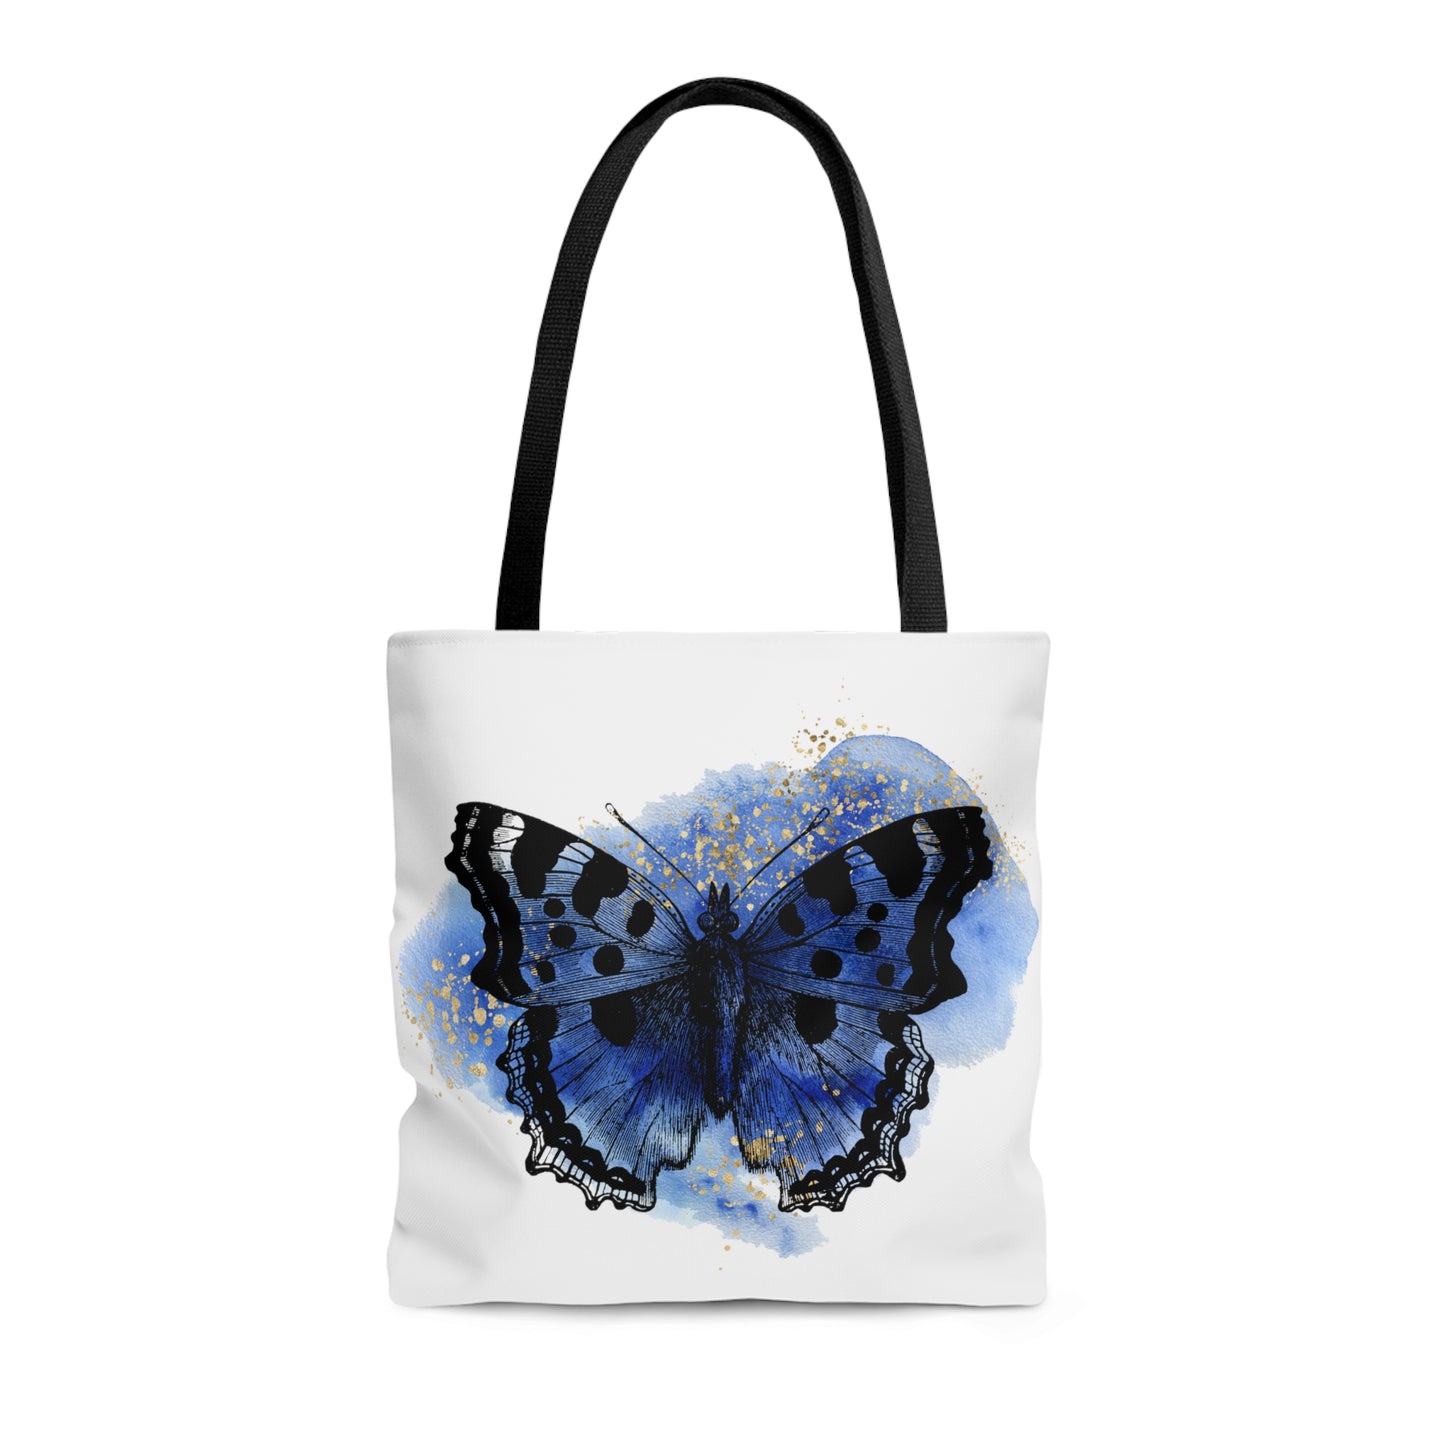 Butterfly Tote Bag, Women's Tote Bag, Trendy Christian